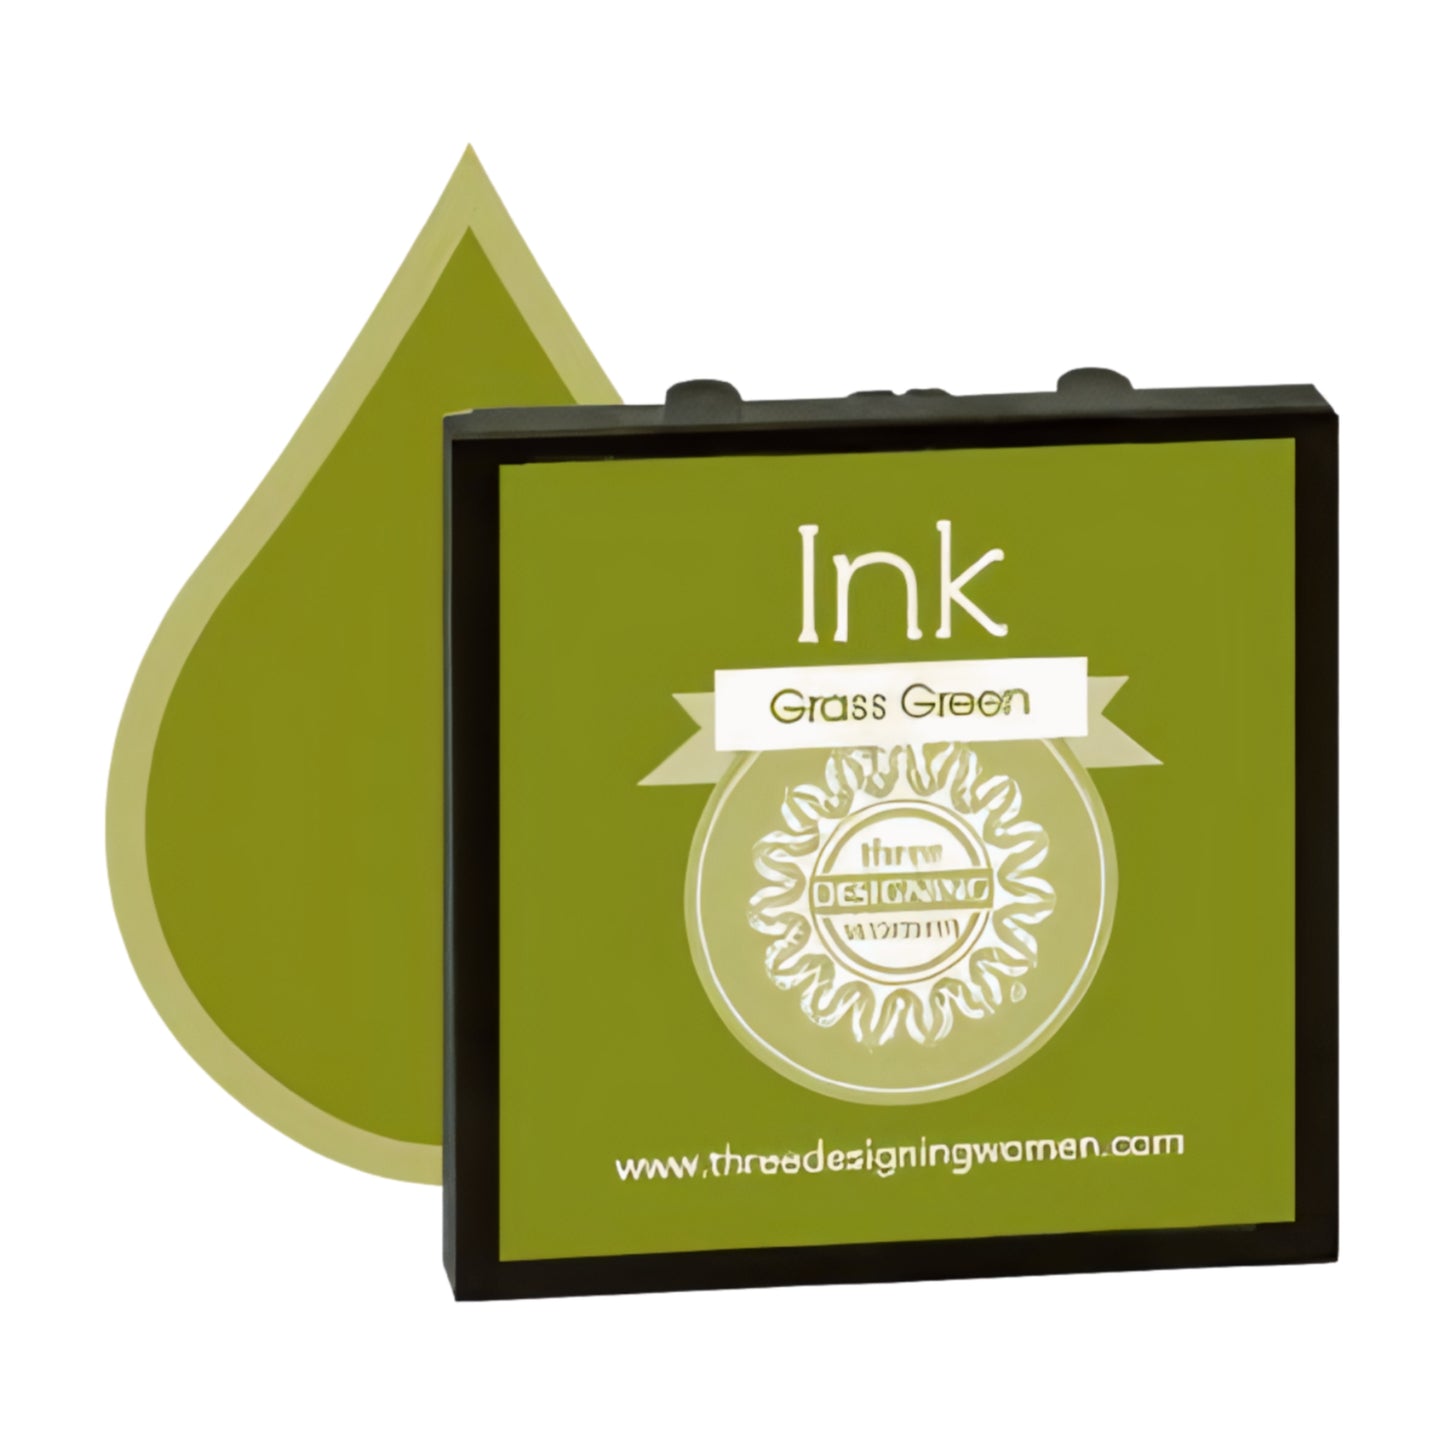 Ink Replacement Cartridge "Grass Green" for Self-Inking Stampers Three Designing Women